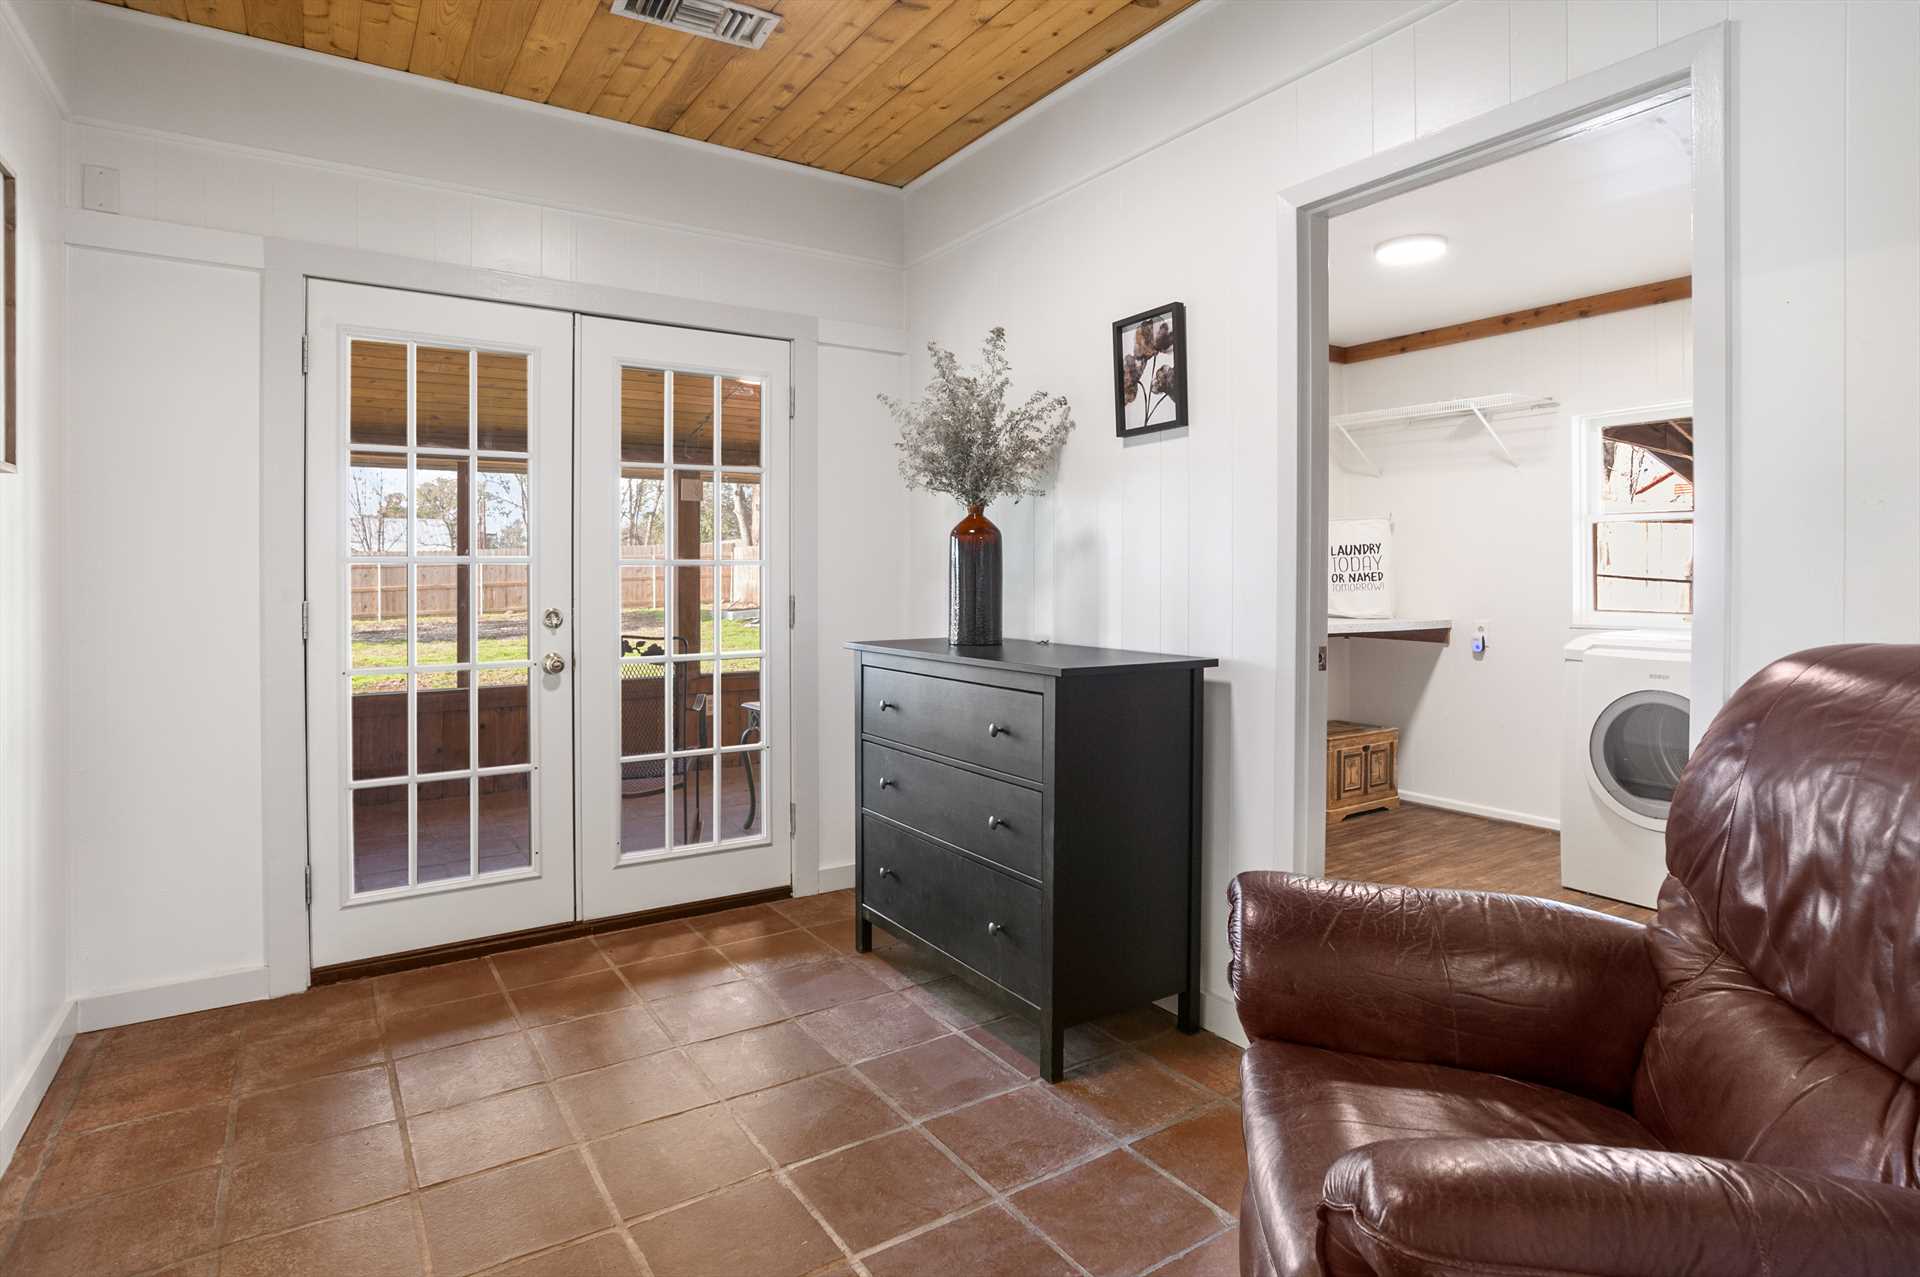                                                 Classic French doors allow entry to the screened-in back porch!